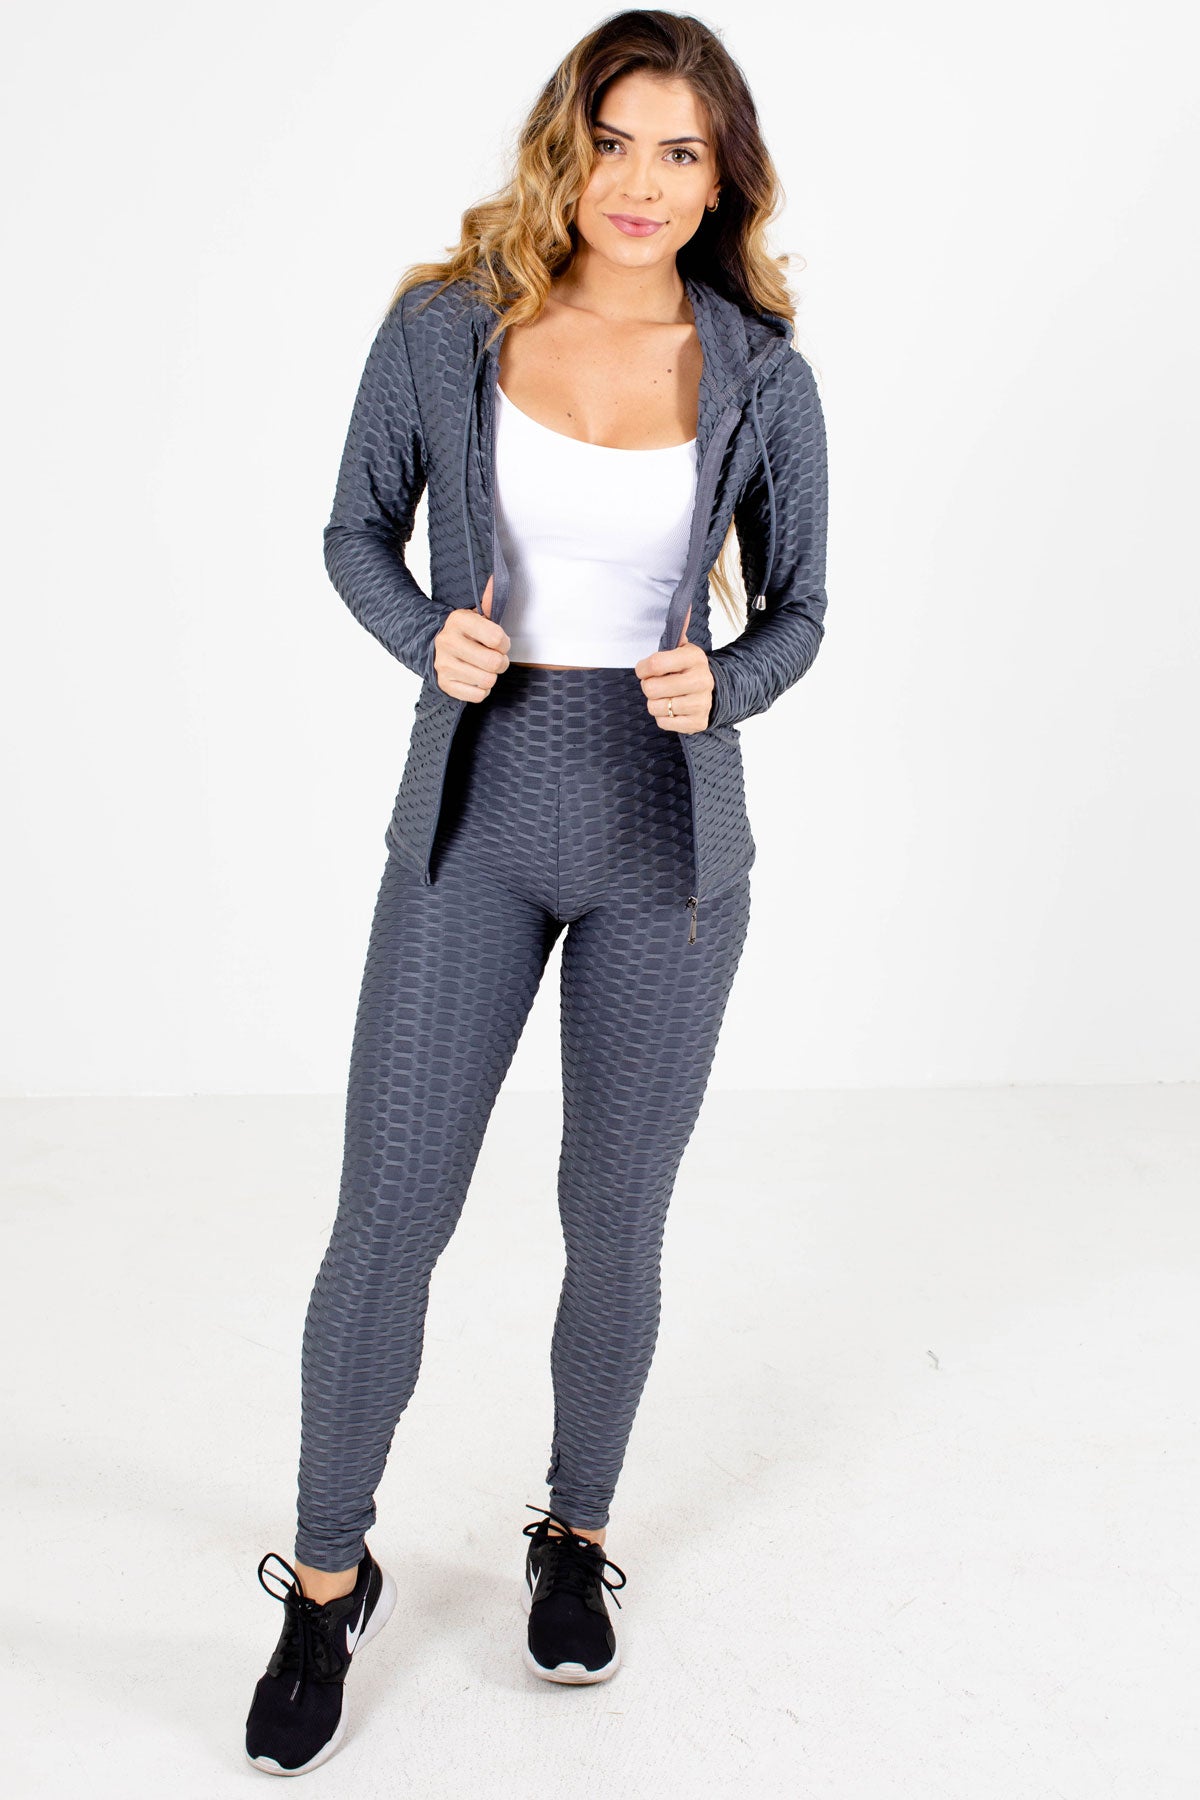 Women's Athletic Jacket and Legging Set in Gray